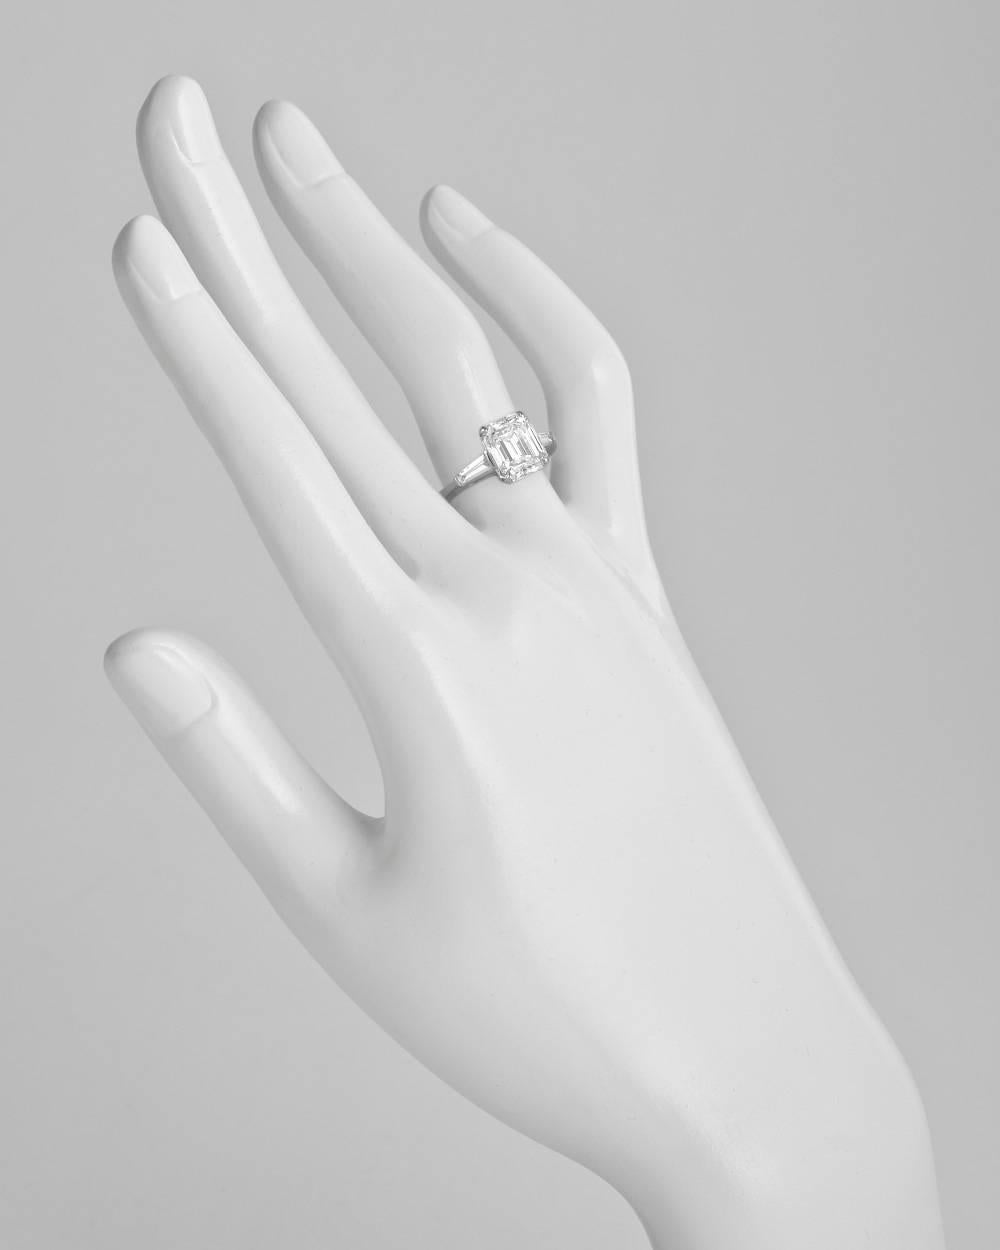 Diamond engagement ring, showcasing a near-colorless emerald-cut diamond weighing 3.21 carats (G-color/VS2-clarity), with two tapered baguette-cut diamonds weighing approximately 0.18 total carats, mounted in platinum. Accompanied by the GIA